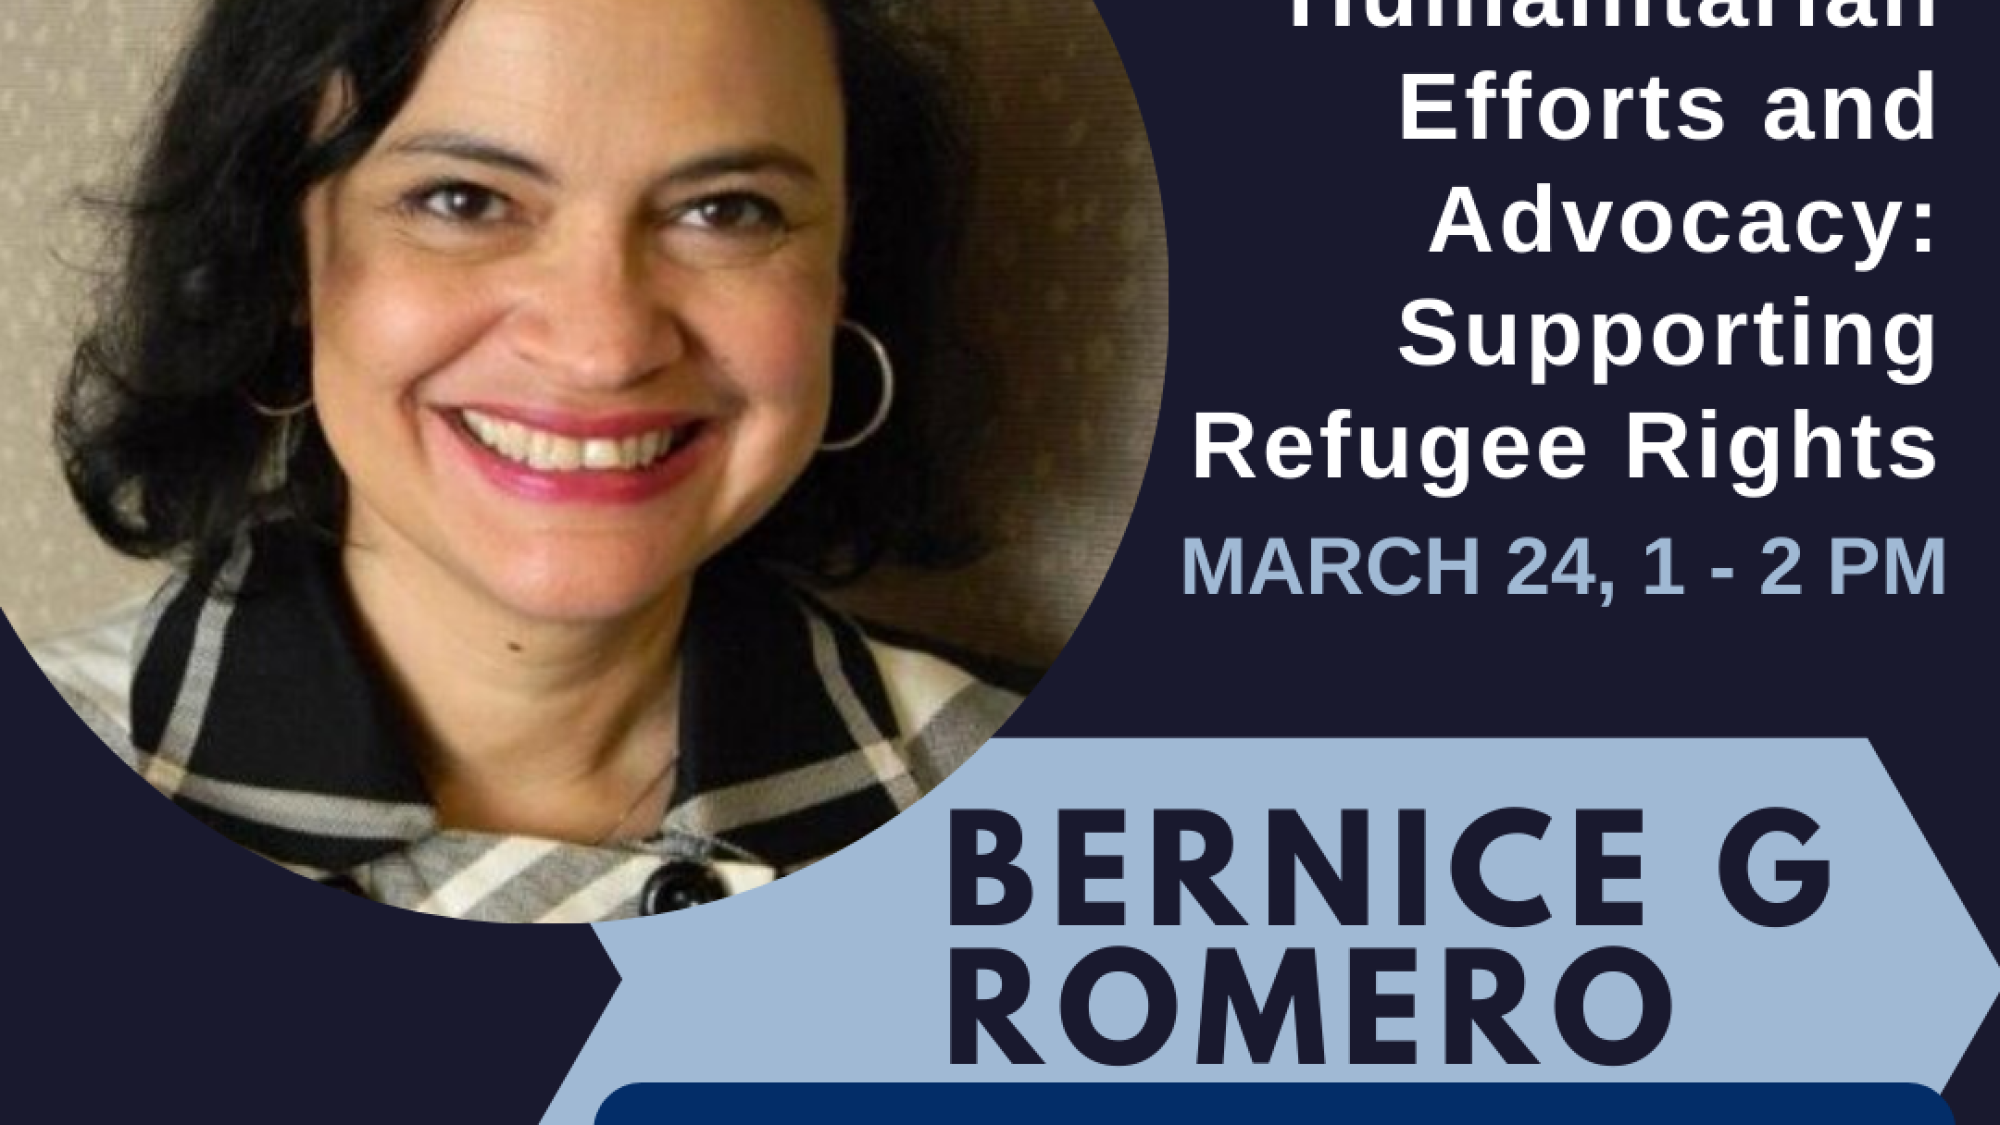 Women&#039;s History Month Coffee Chat: &quot;Humanitarian Efforts and Advocacy: Supporting Refugee Rights,&quot; March 24, 1-2 PM, with Bernice G. Romero, Executive Director of the Norwegian Refugee Council - USA